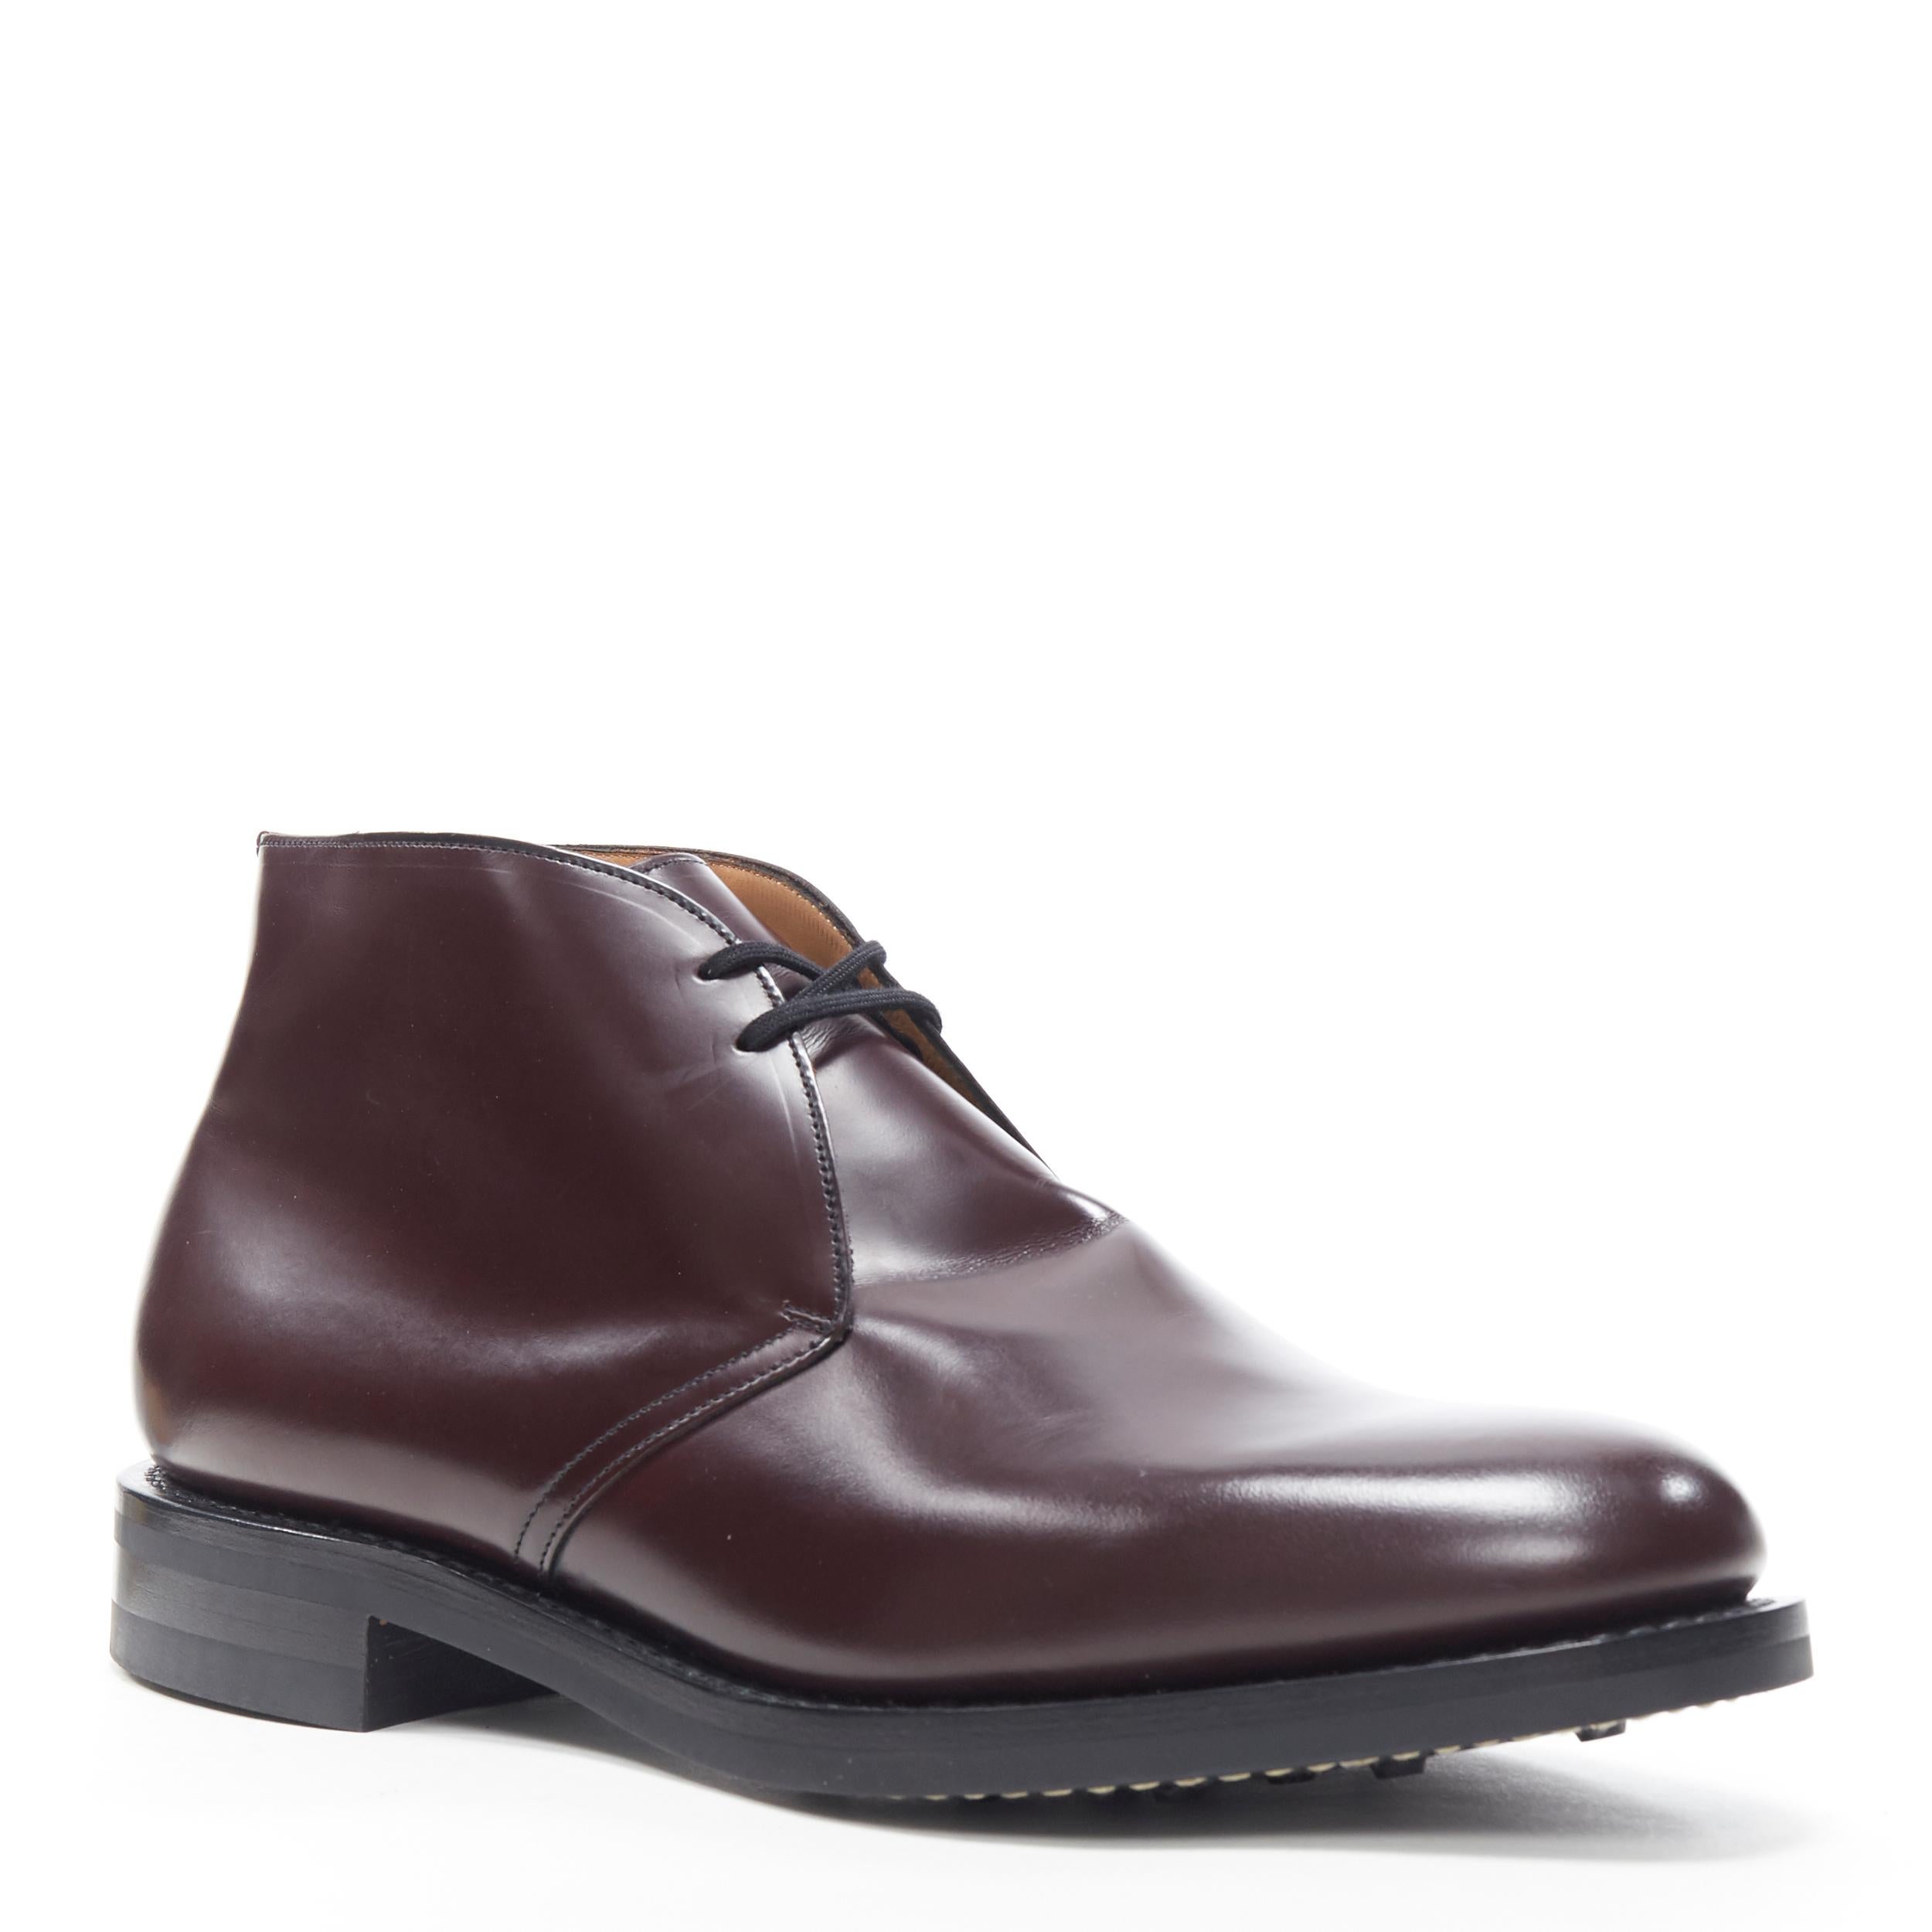 new CHURCHS Ryder 3 Burgundy Bright Calf polished leather chukka boots UK11 US12
Brand: Churchs
Model Name / Style: Ryder
Material: Leather
Color: Burgundy
Pattern: Solid
Closure: Lace up
Extra Detail: Polished dark burgundy 'Bright Calf' leather